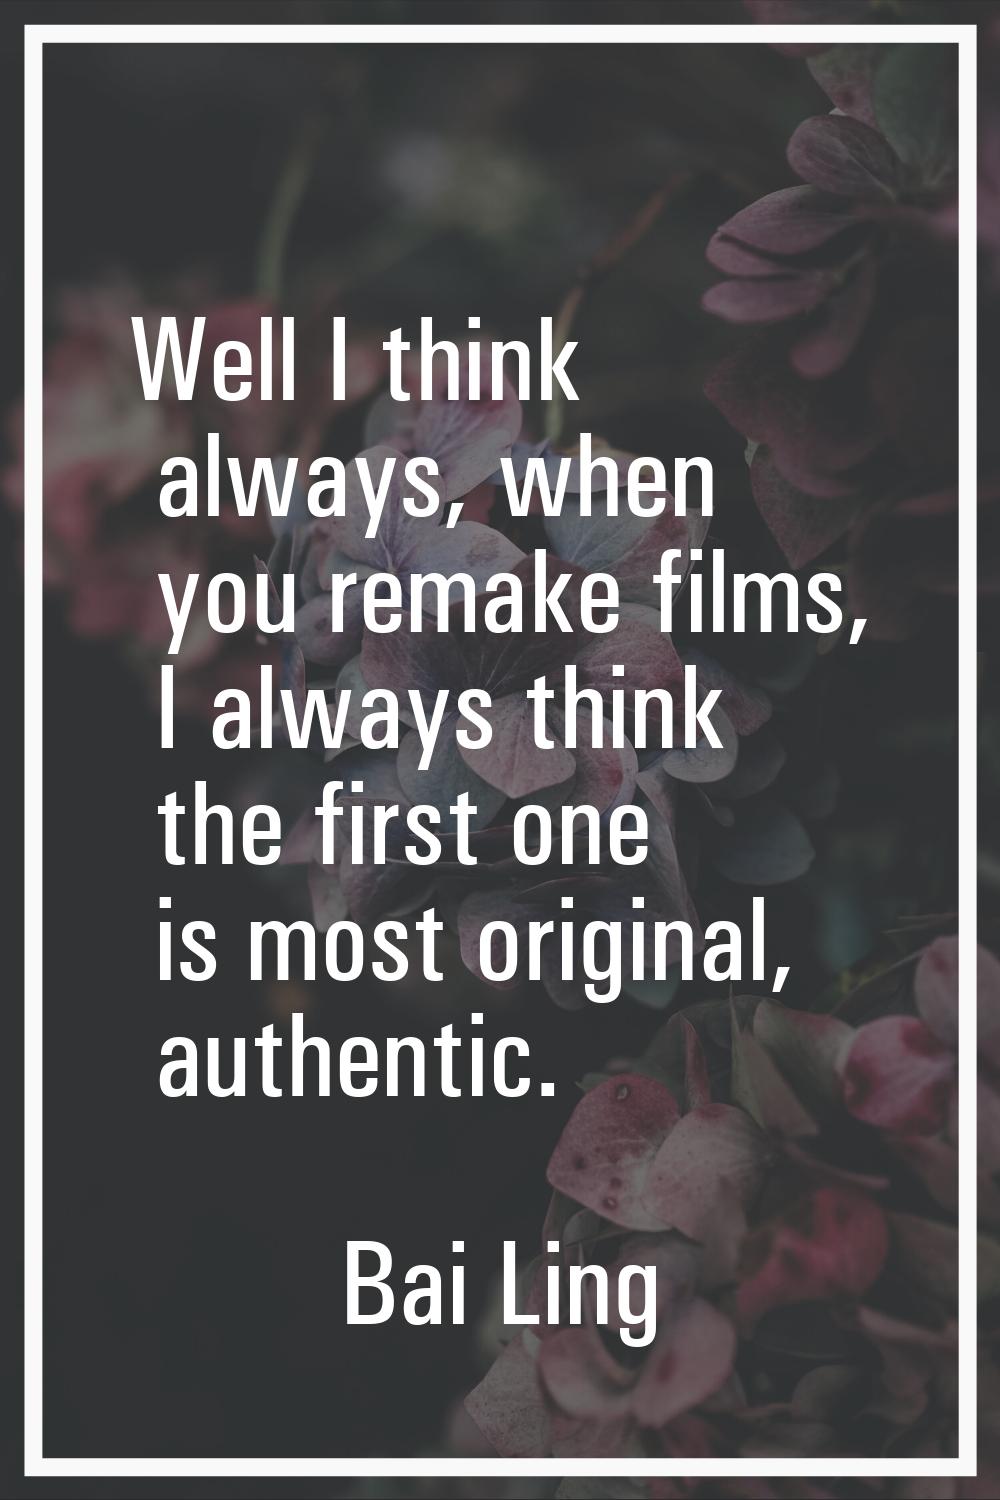 Well I think always, when you remake films, I always think the first one is most original, authenti